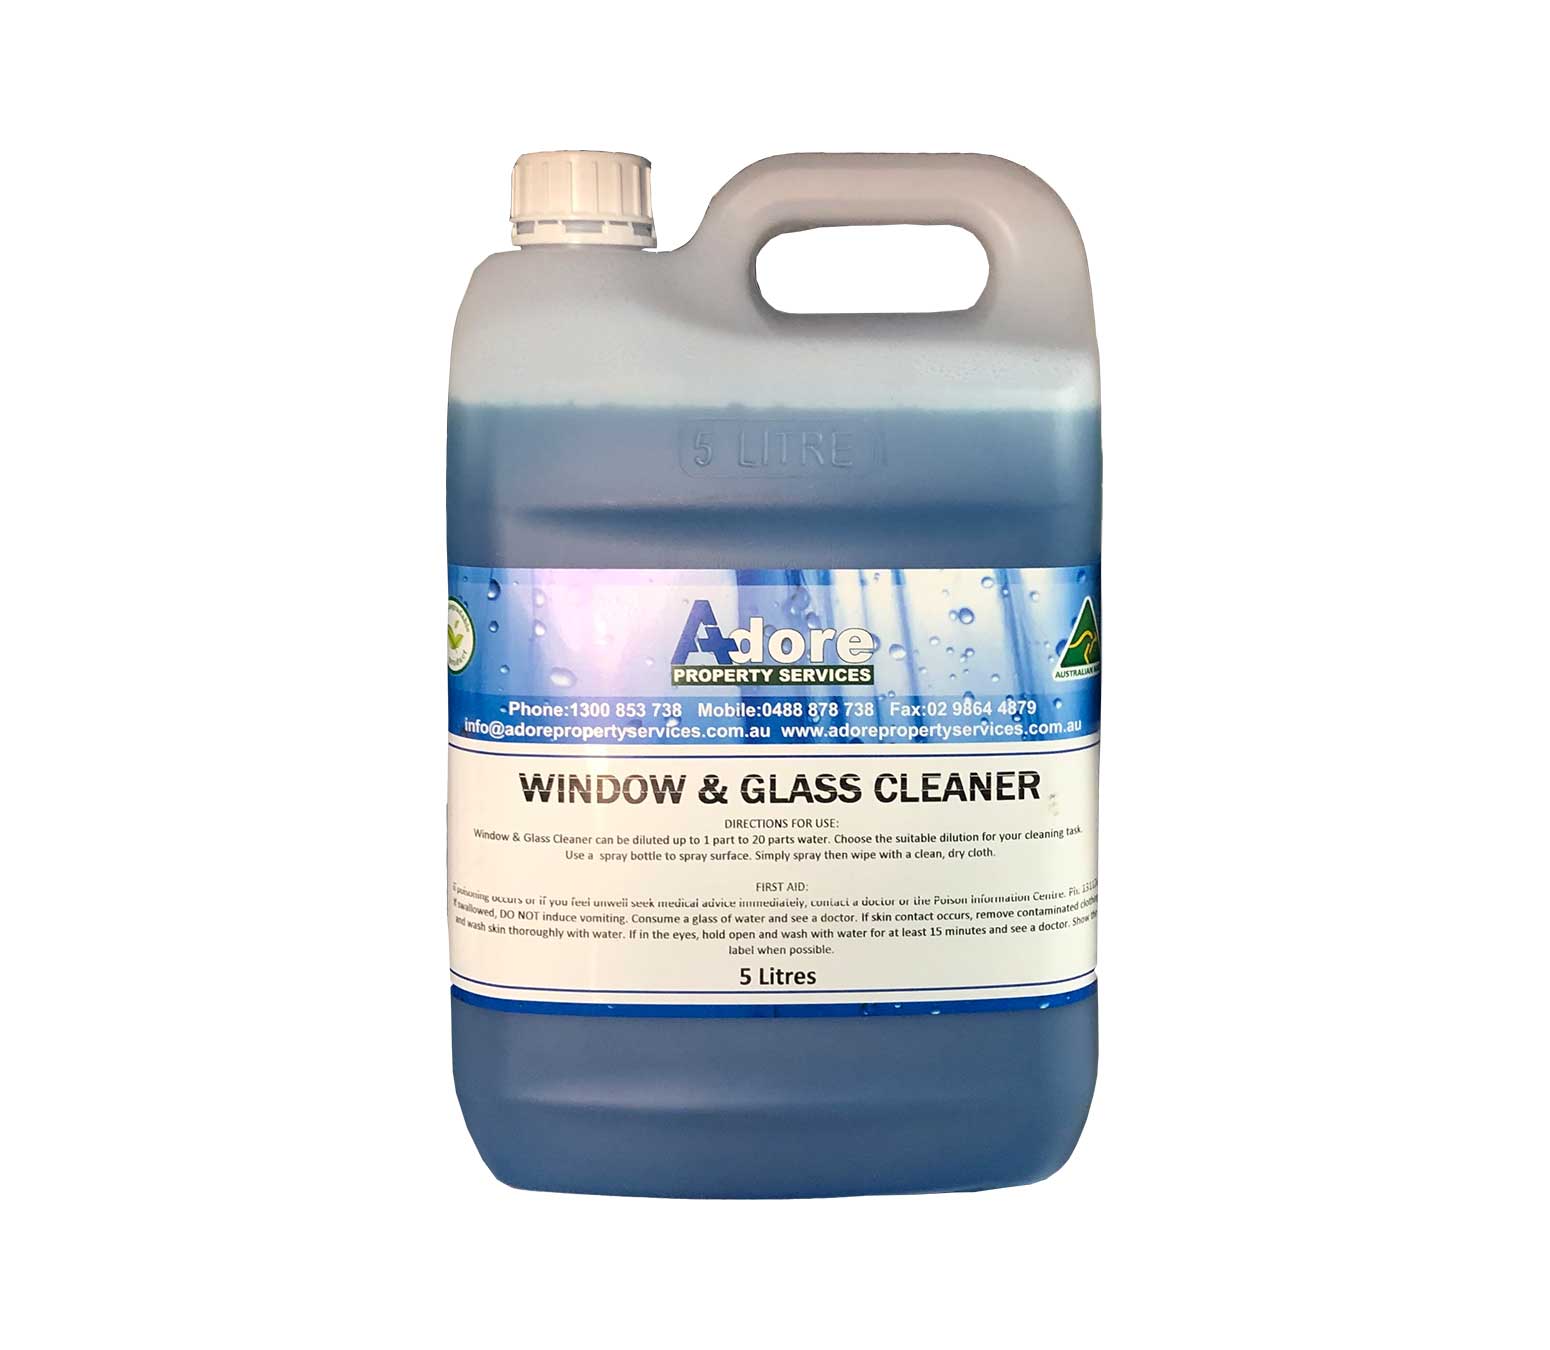 WINDOW CLEANER cleaning glass